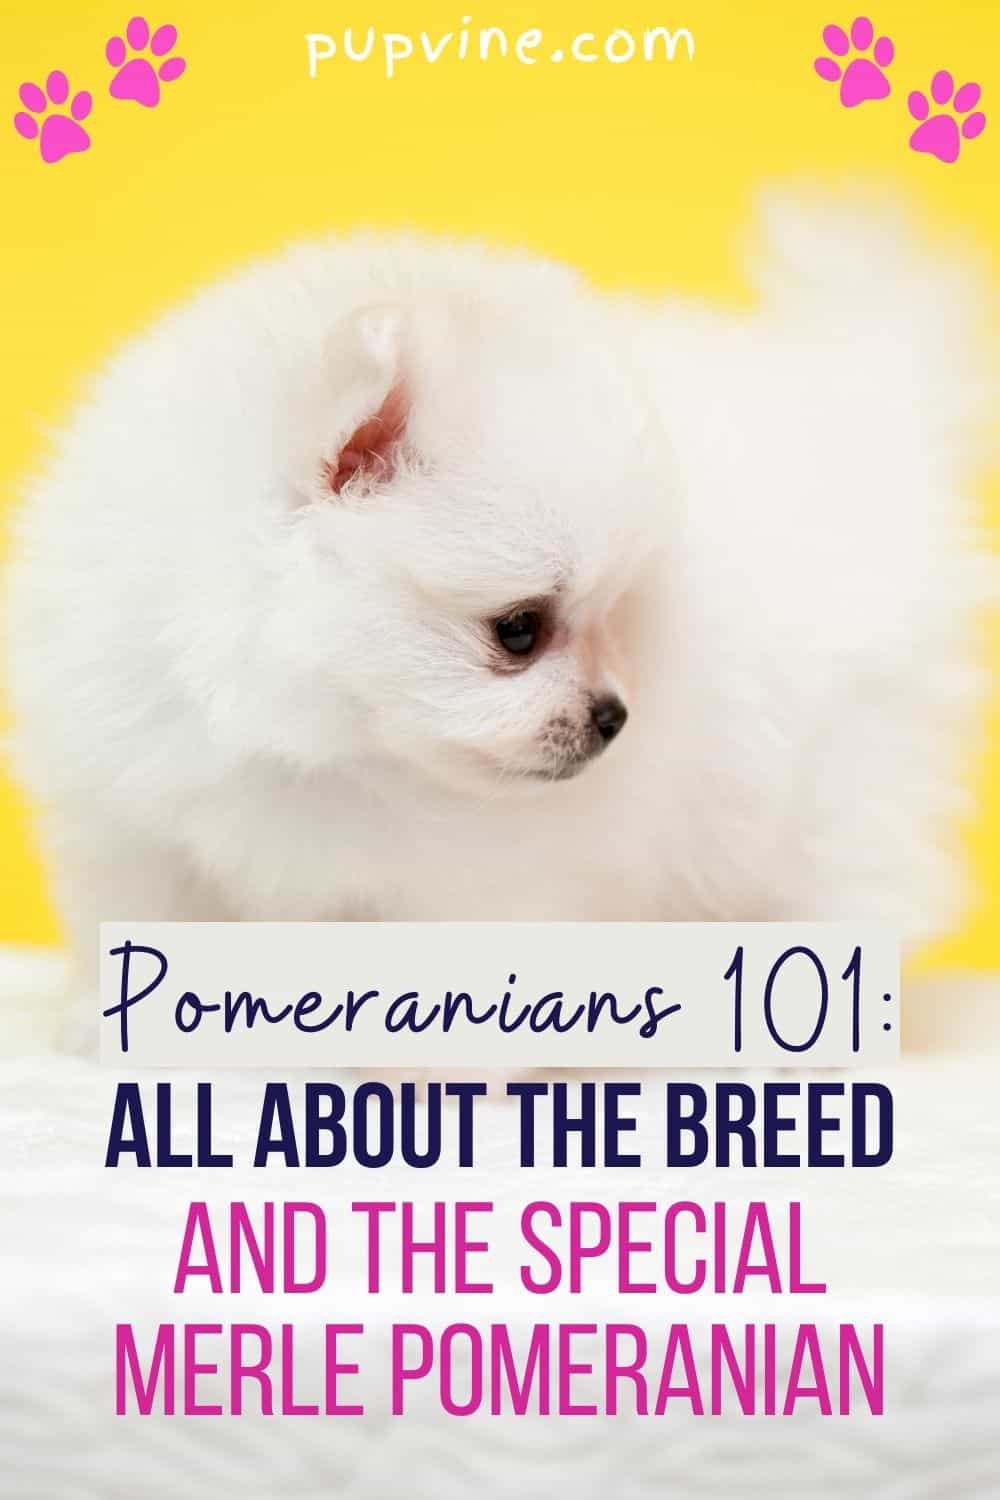 Pomeranians 101: All About The Breed And The Special Merle Pomeranian